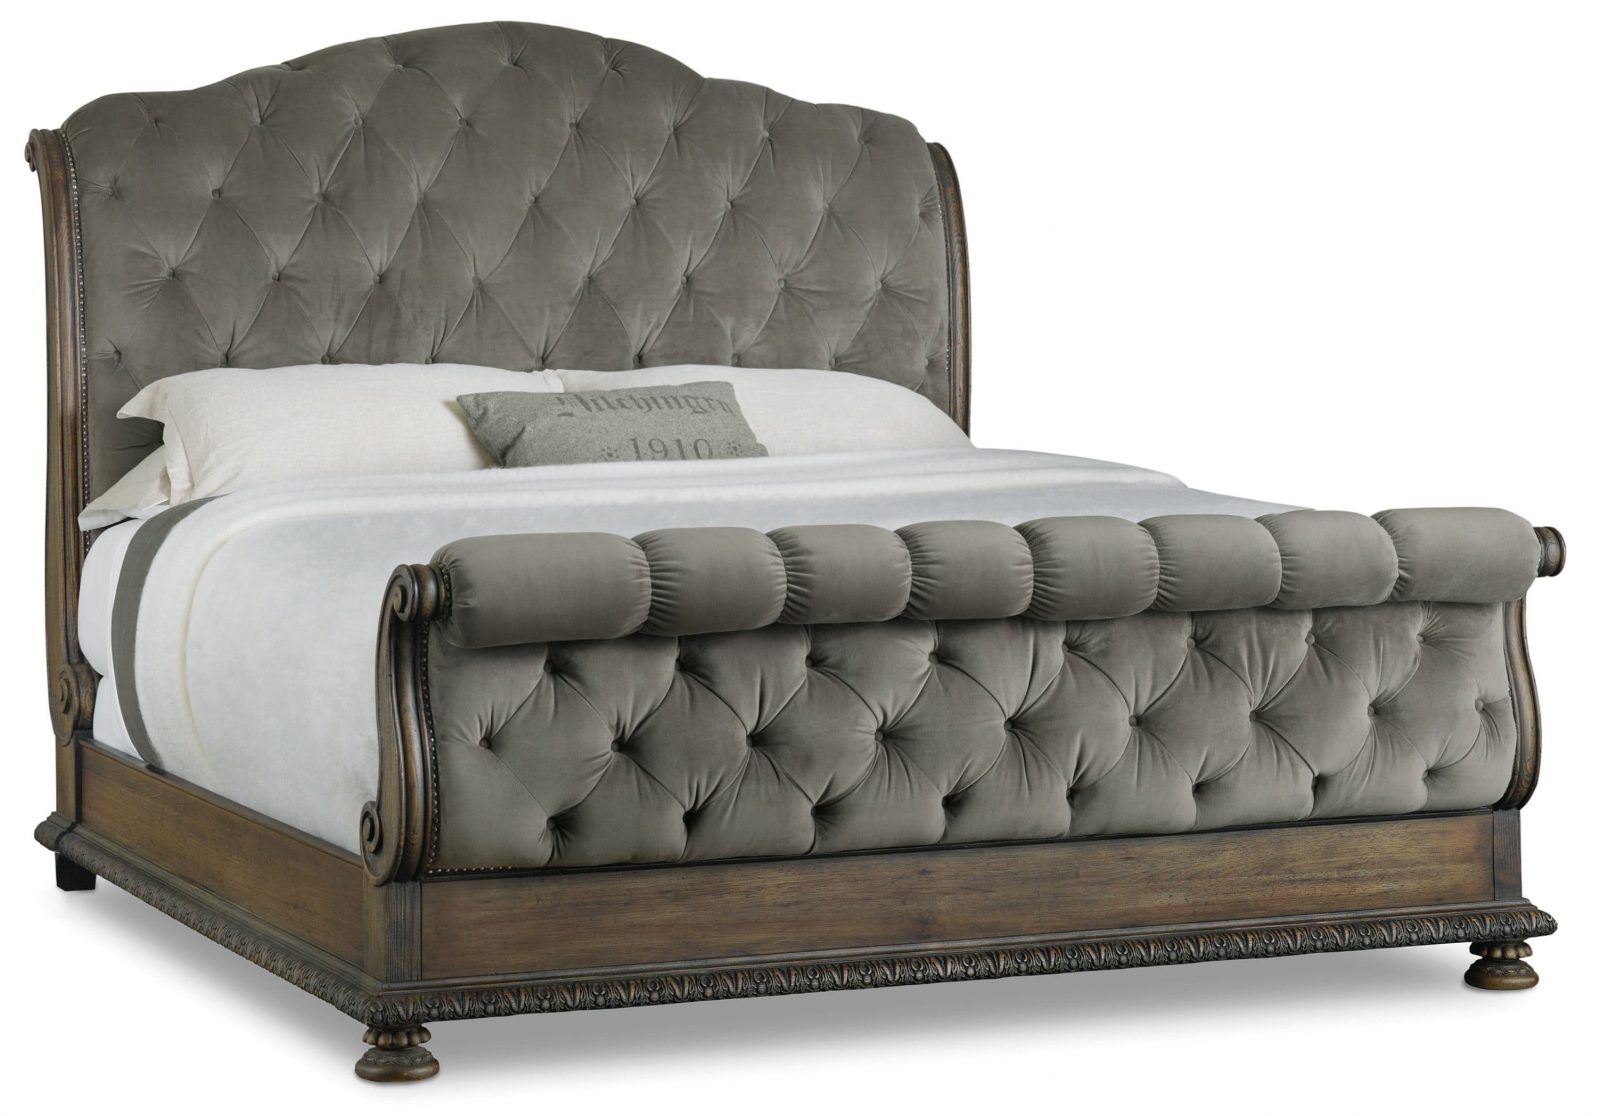 Rhapsody Tufted Bed 6/6, King